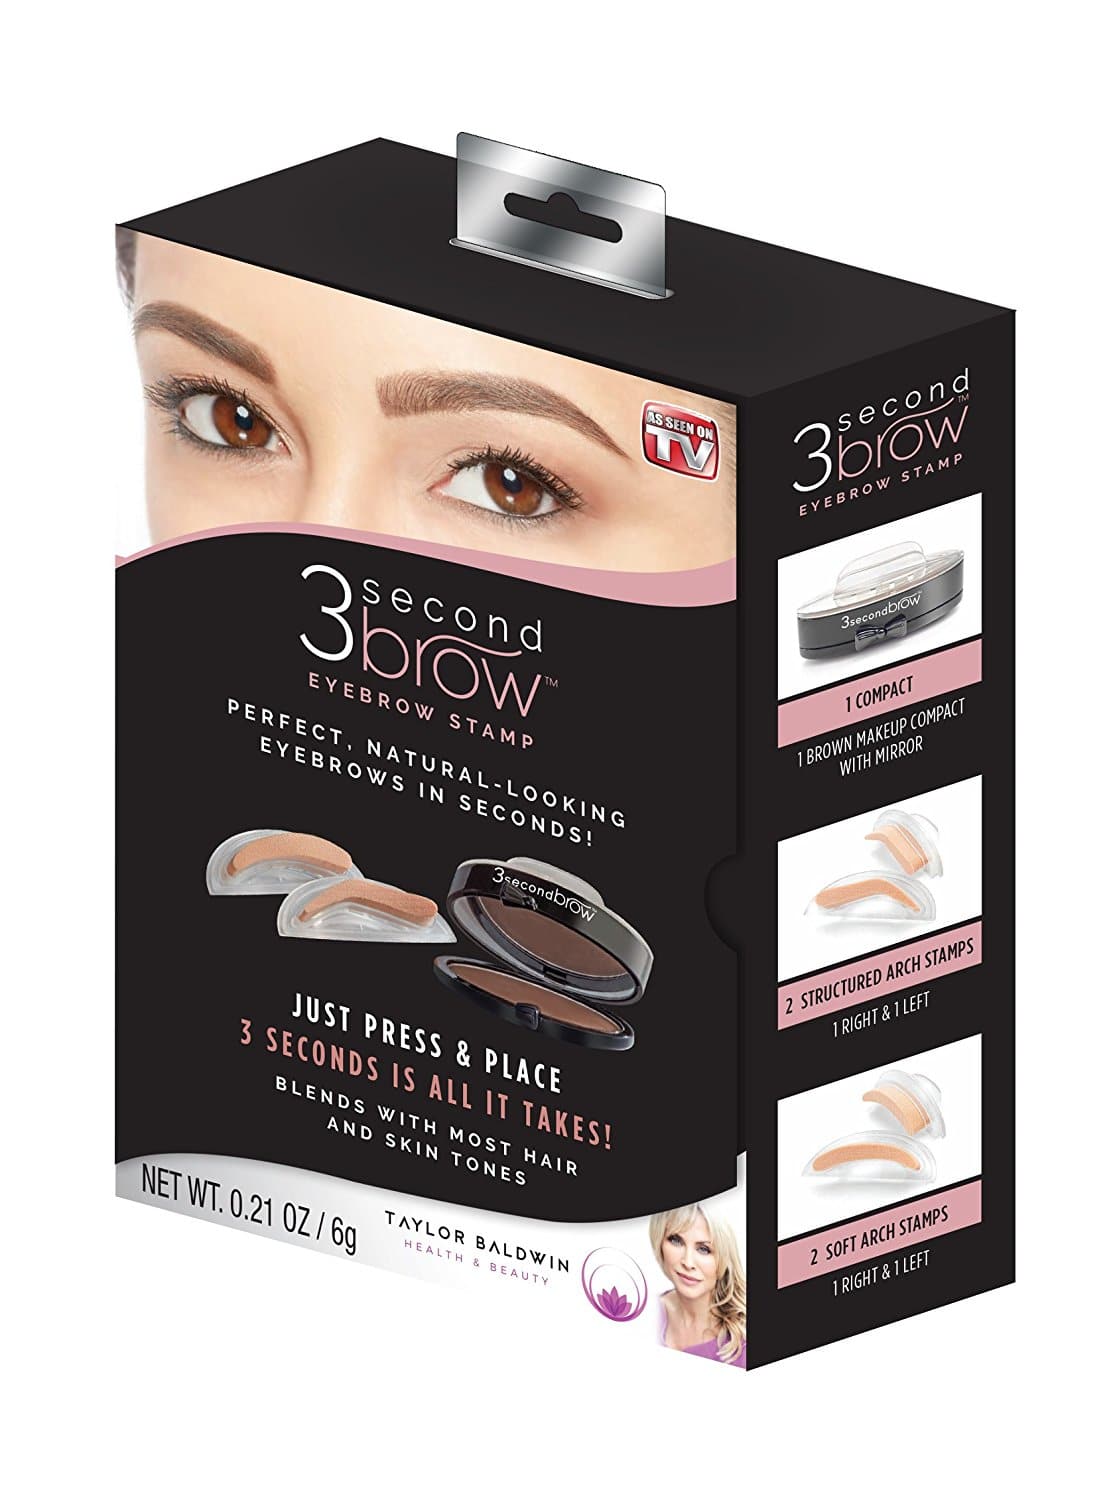 Product Testing – 3 Second Brow